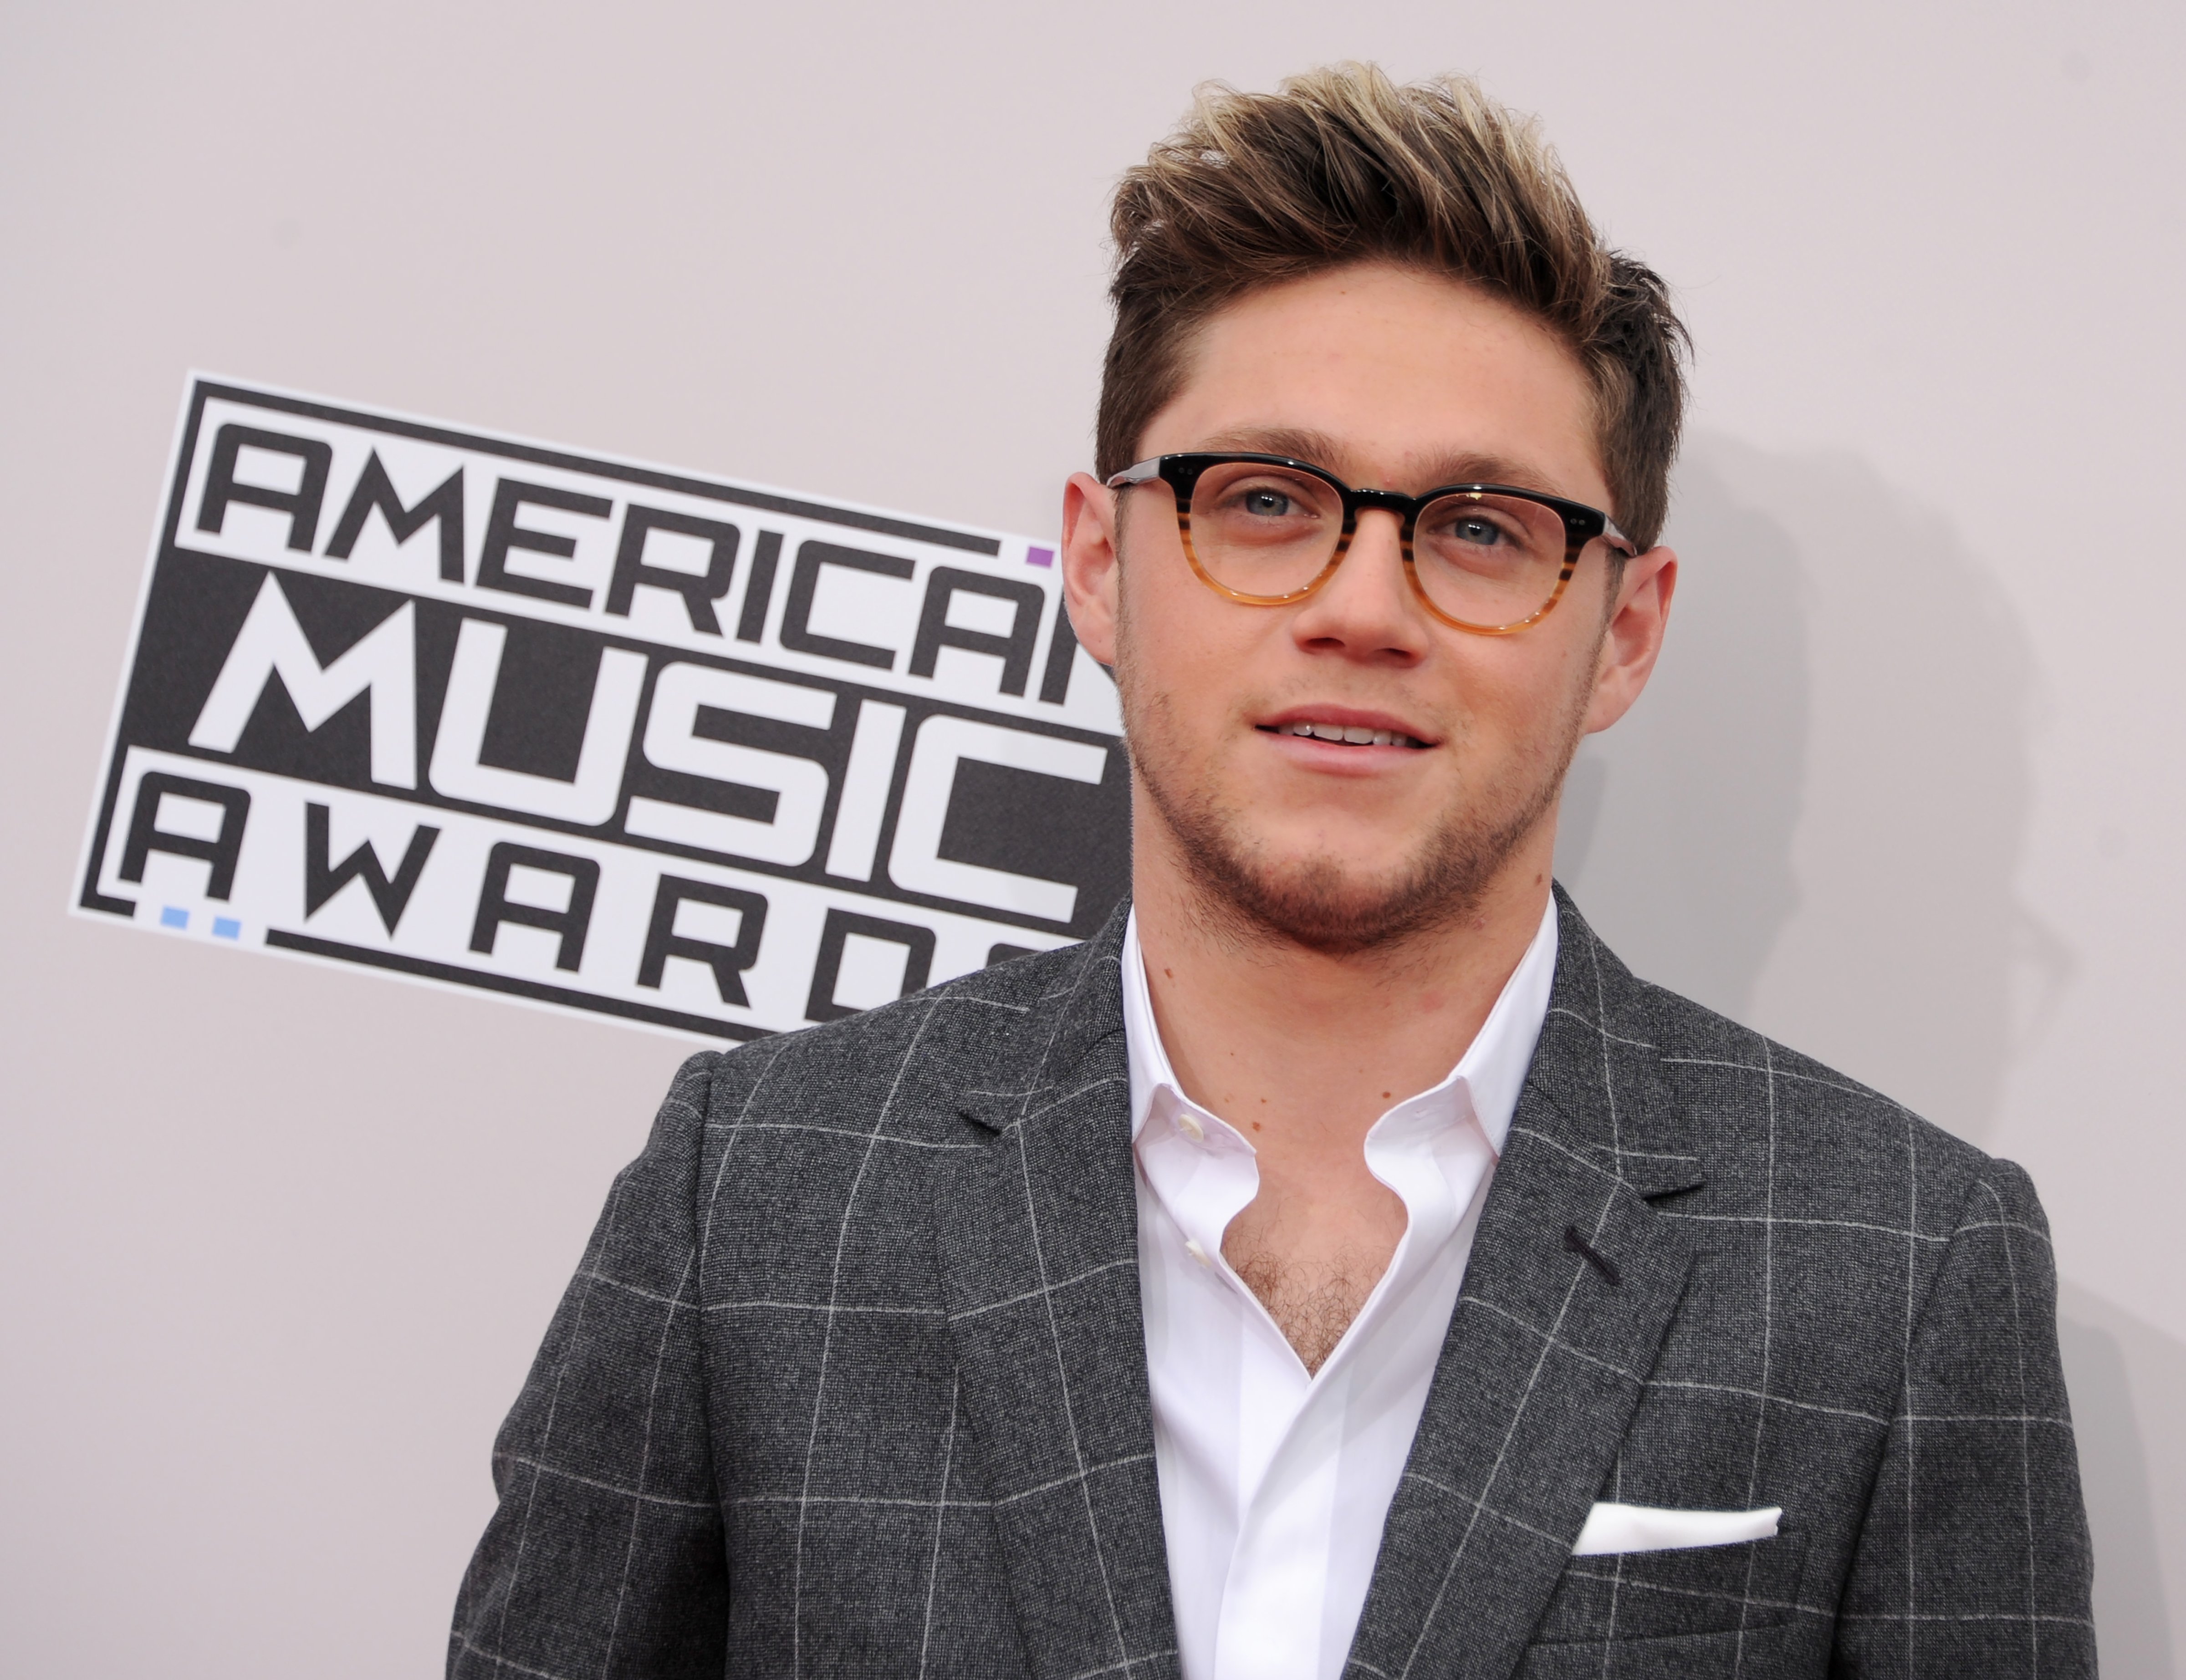 Niall Horan arrives at the 2016 American Music Awards at Microsoft Theater on November 20, 2016. (Gregg DeGuire&mdash;Getty Images)